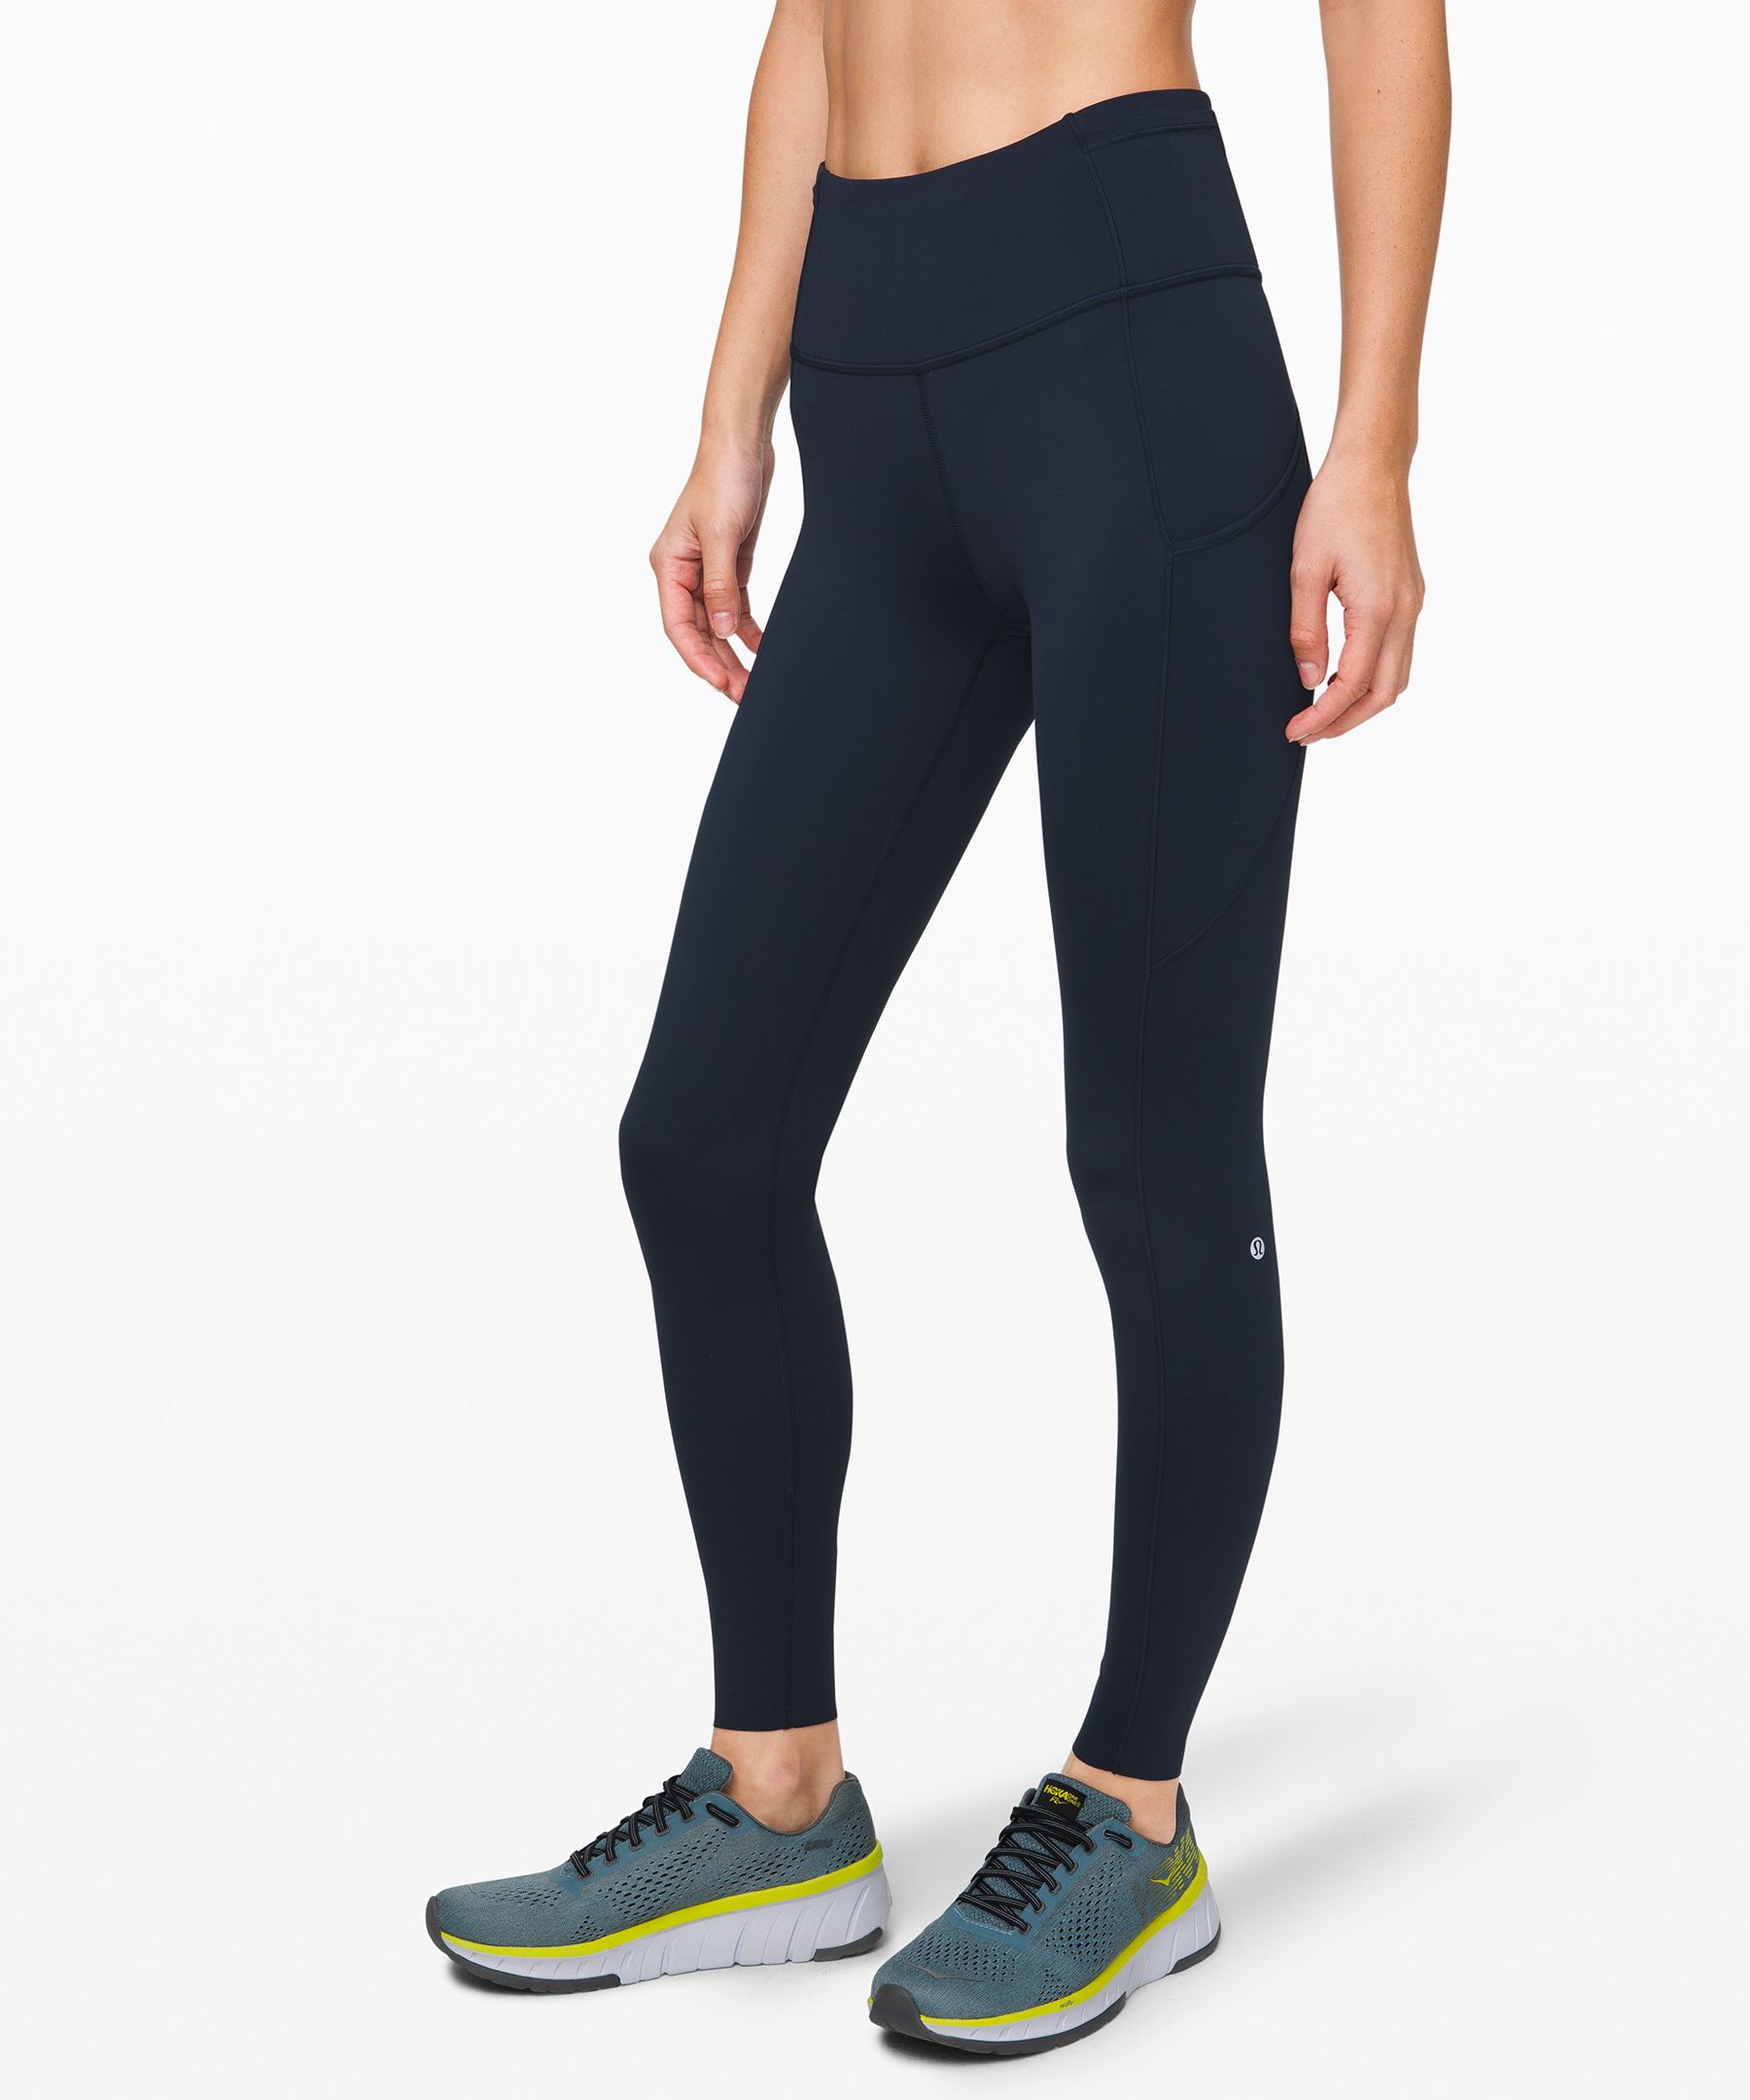 Lululemon Fast And Free High-rise Tights 28"